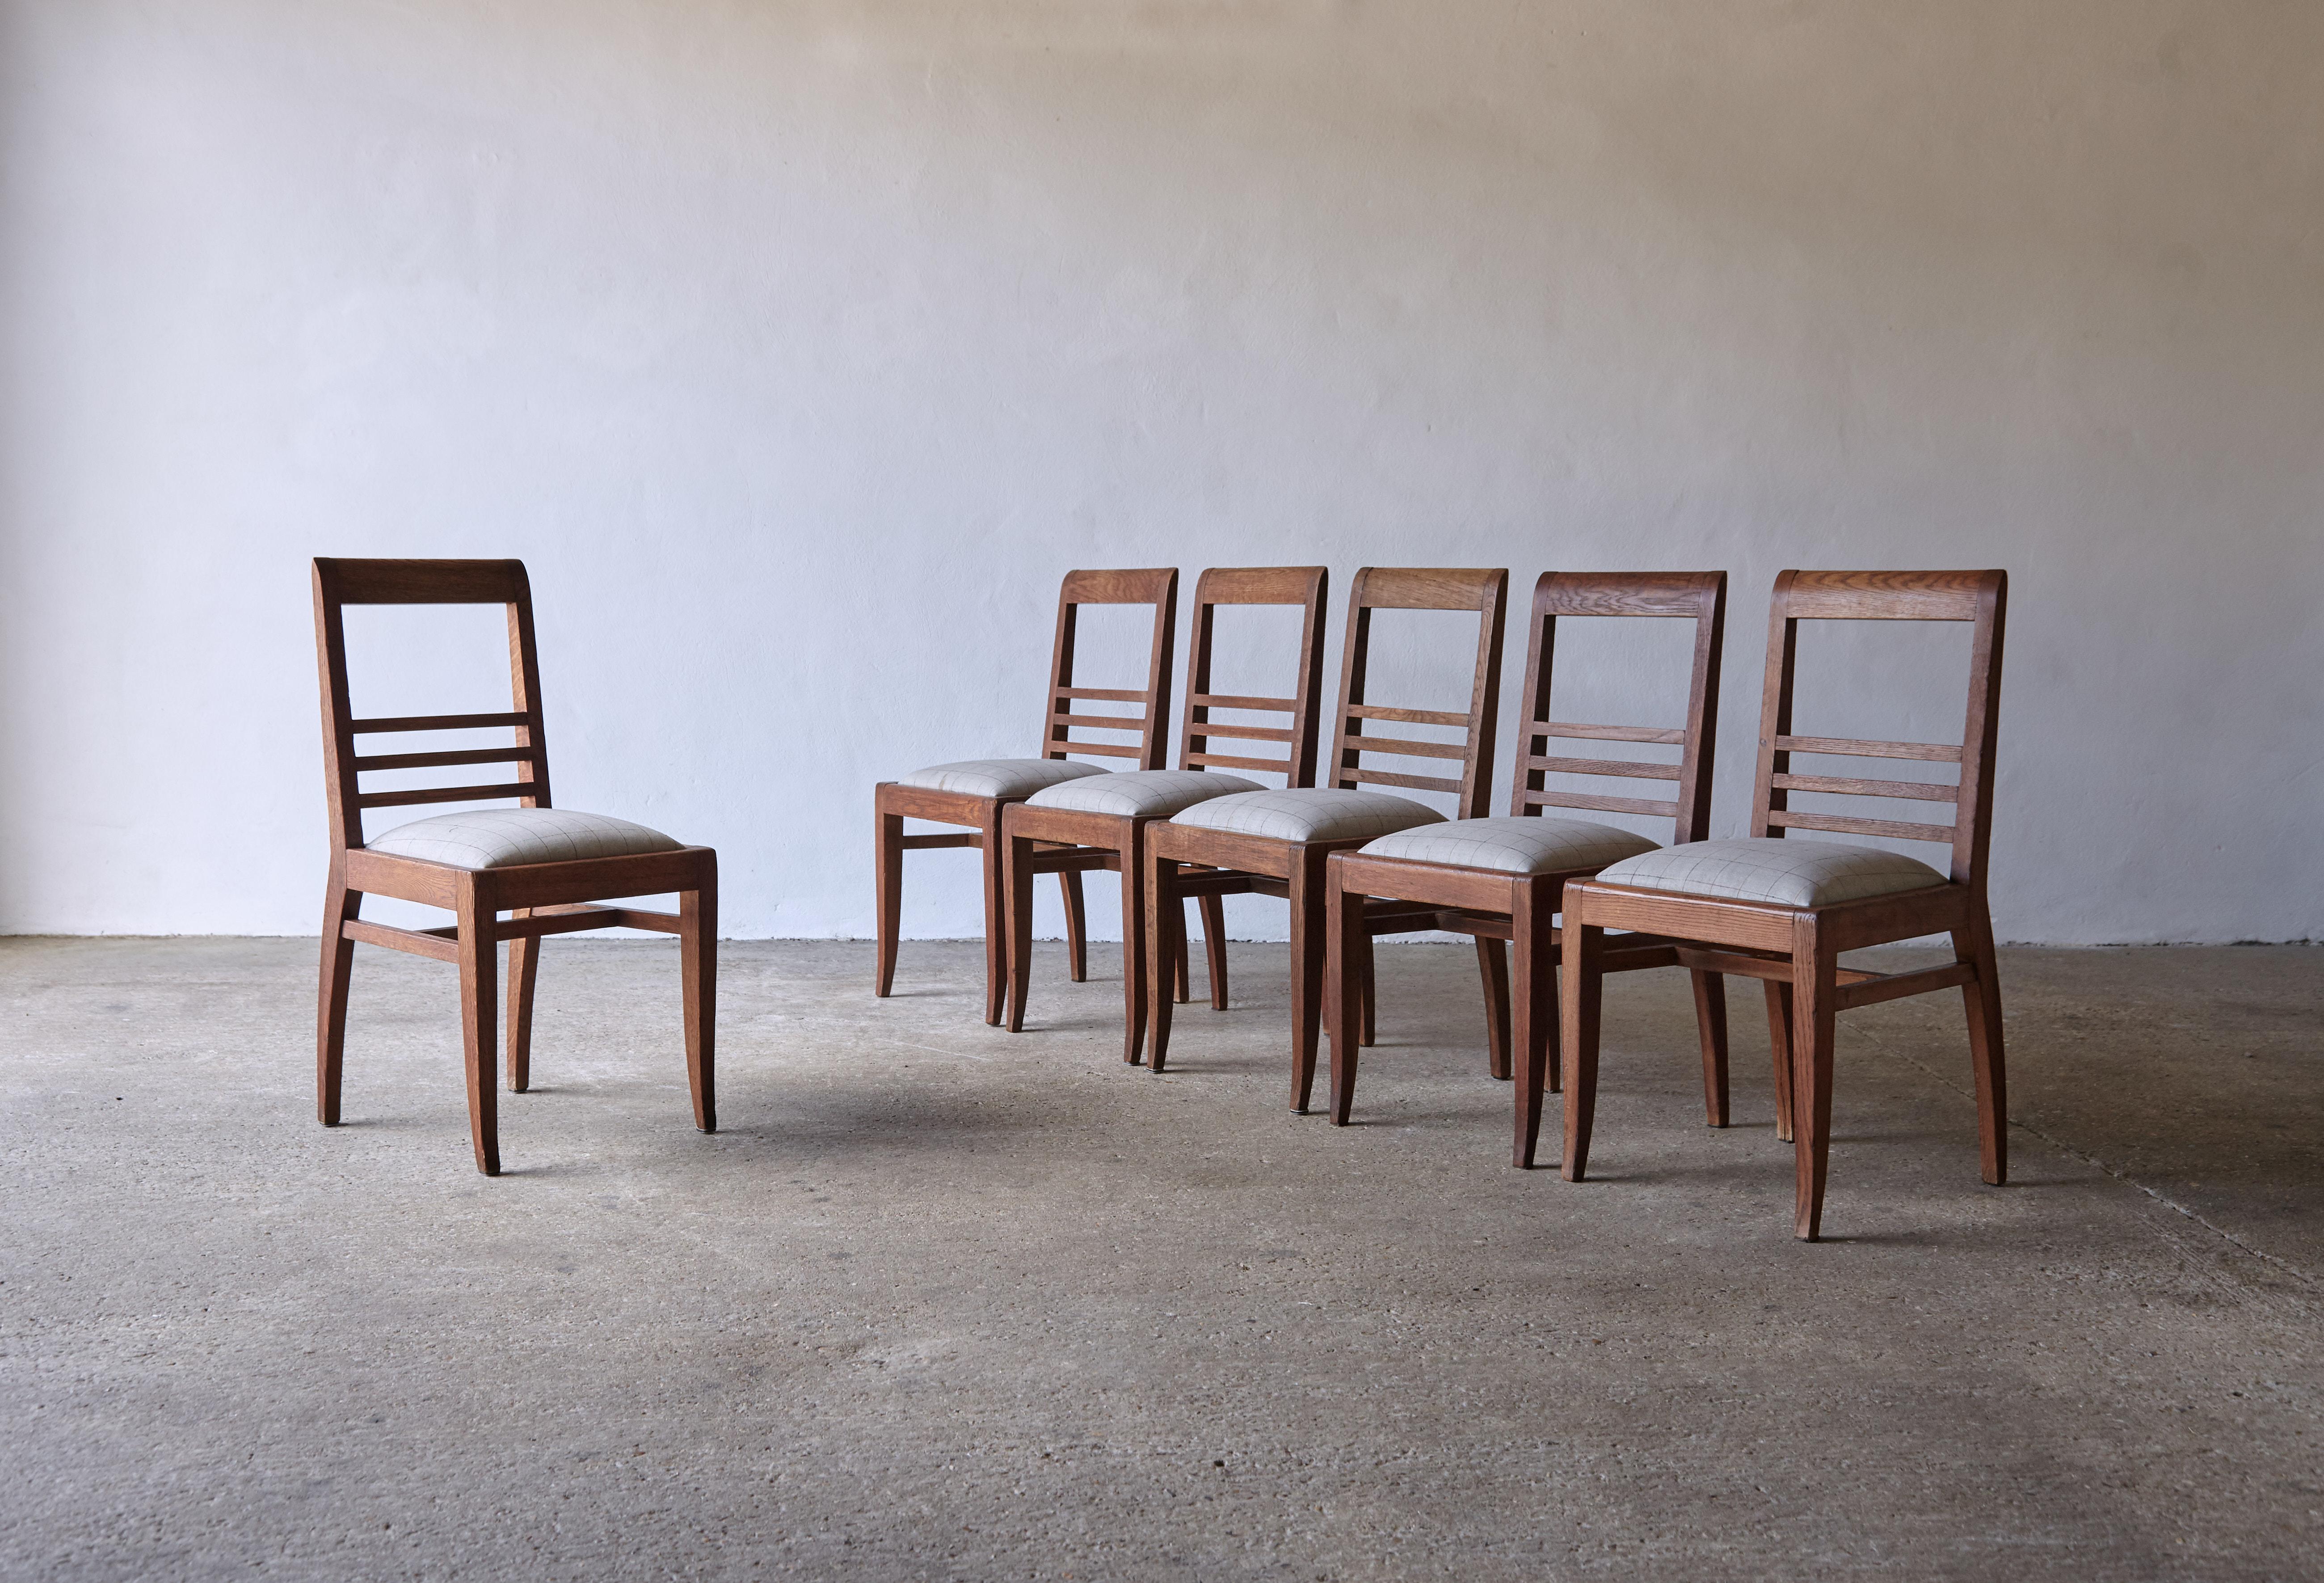 A rare set of 6 original Michel Dufet (Duffet) dining chairs dating from the 1950s. In good original vintage condition, some signs of use and wear to the wood, including minor losses. The seat pads are loose and easy to recover. Fast shipping